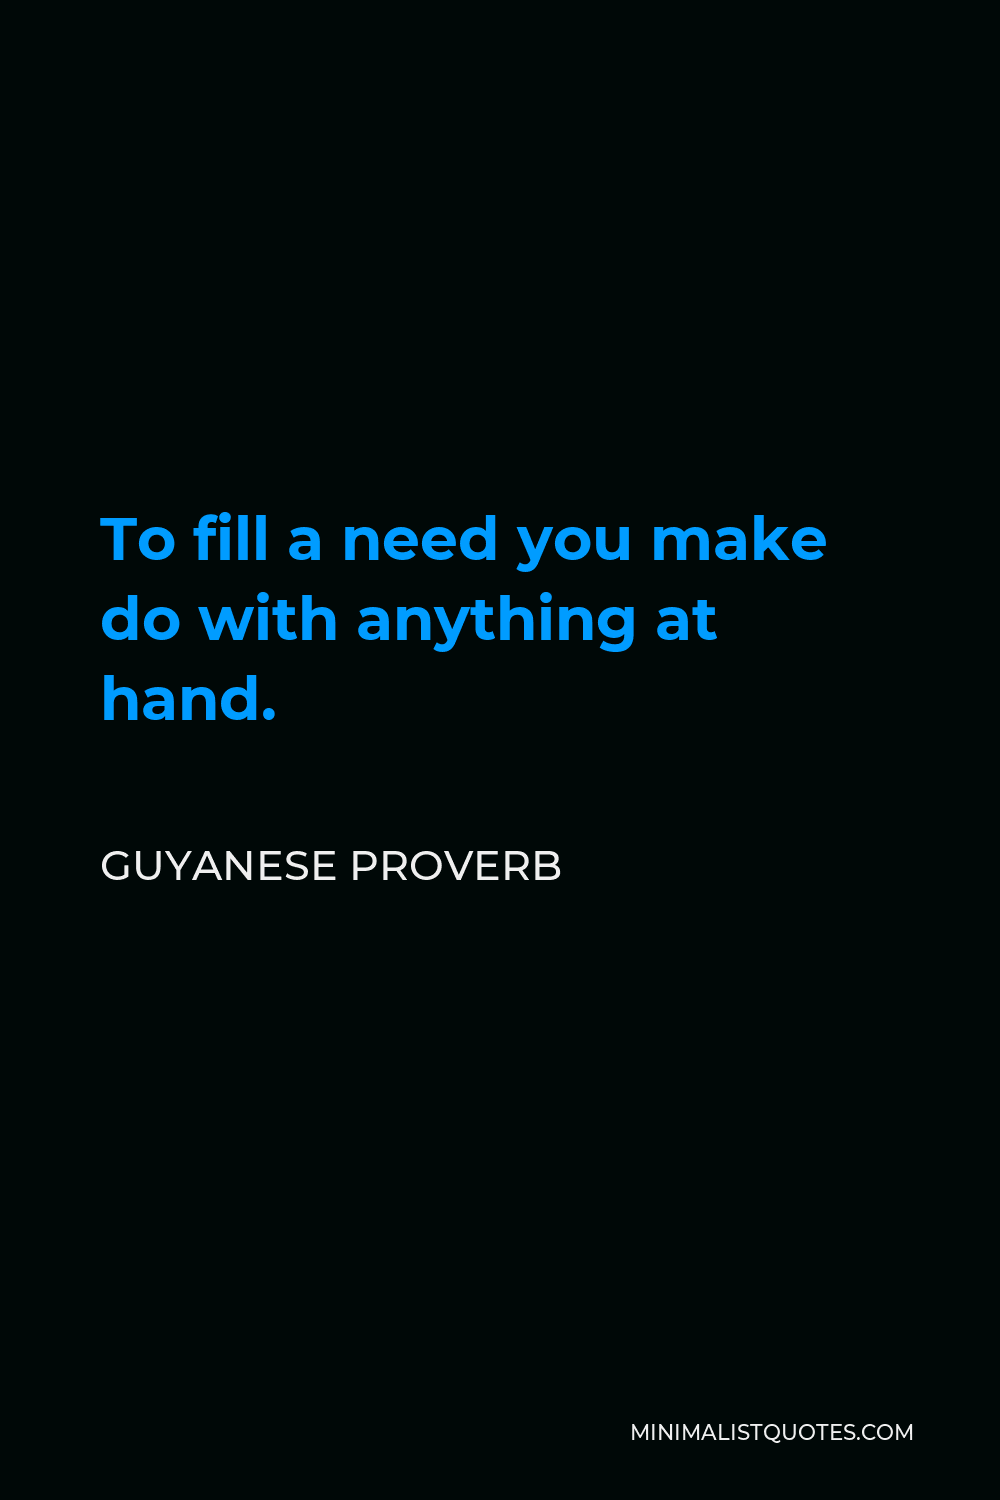 Guyanese Proverb Quote - To fill a need you make do with anything at hand.